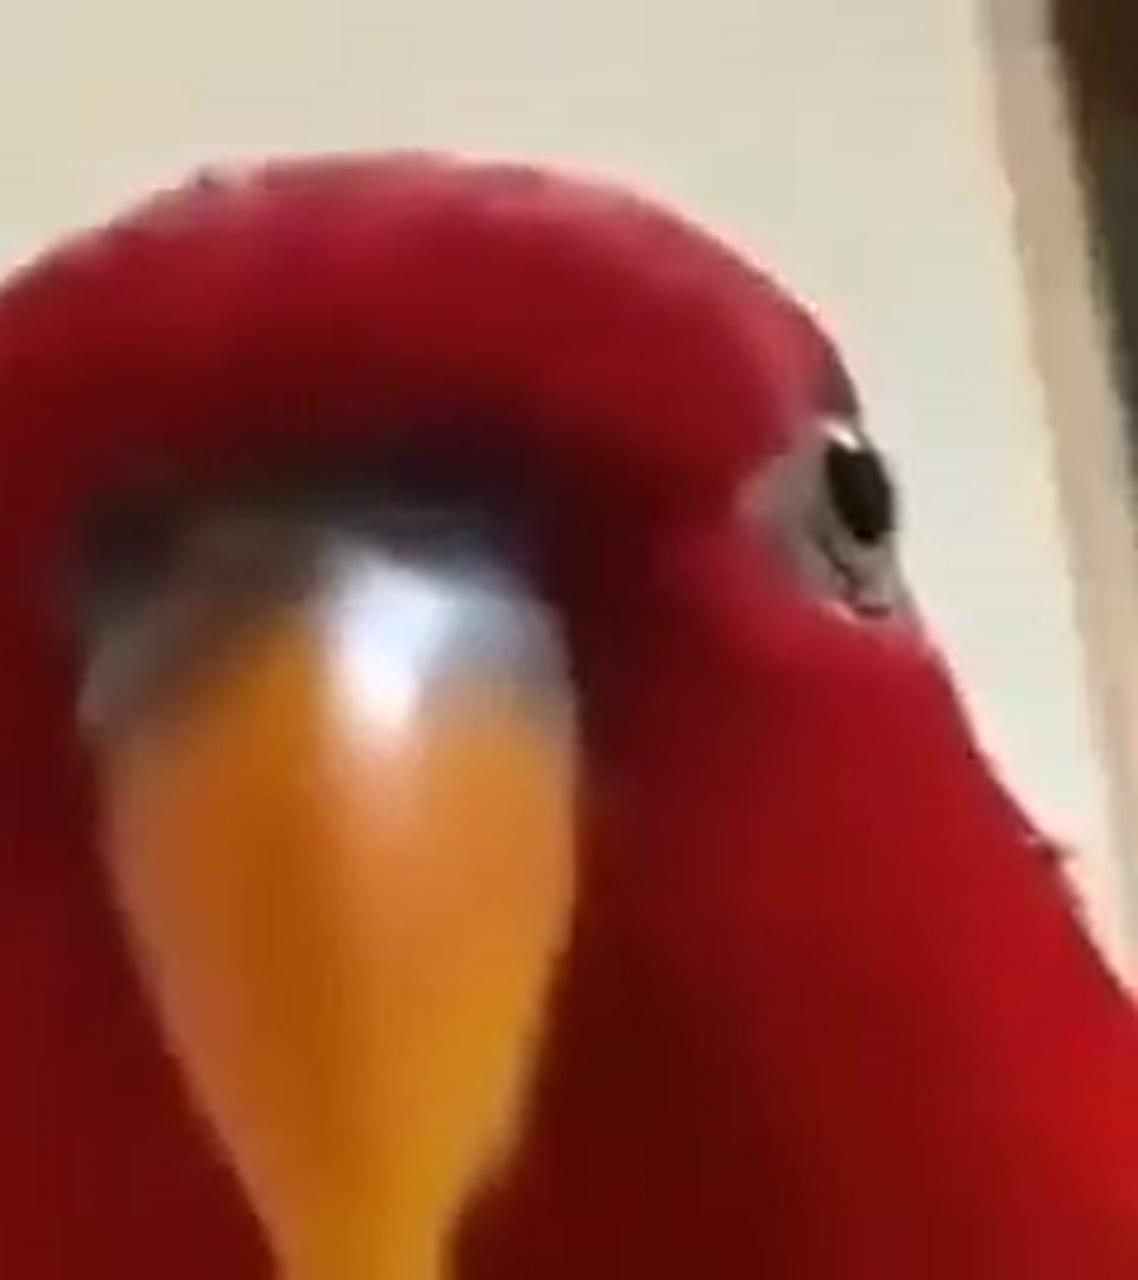 Red bird knows what you did; vines funny videos